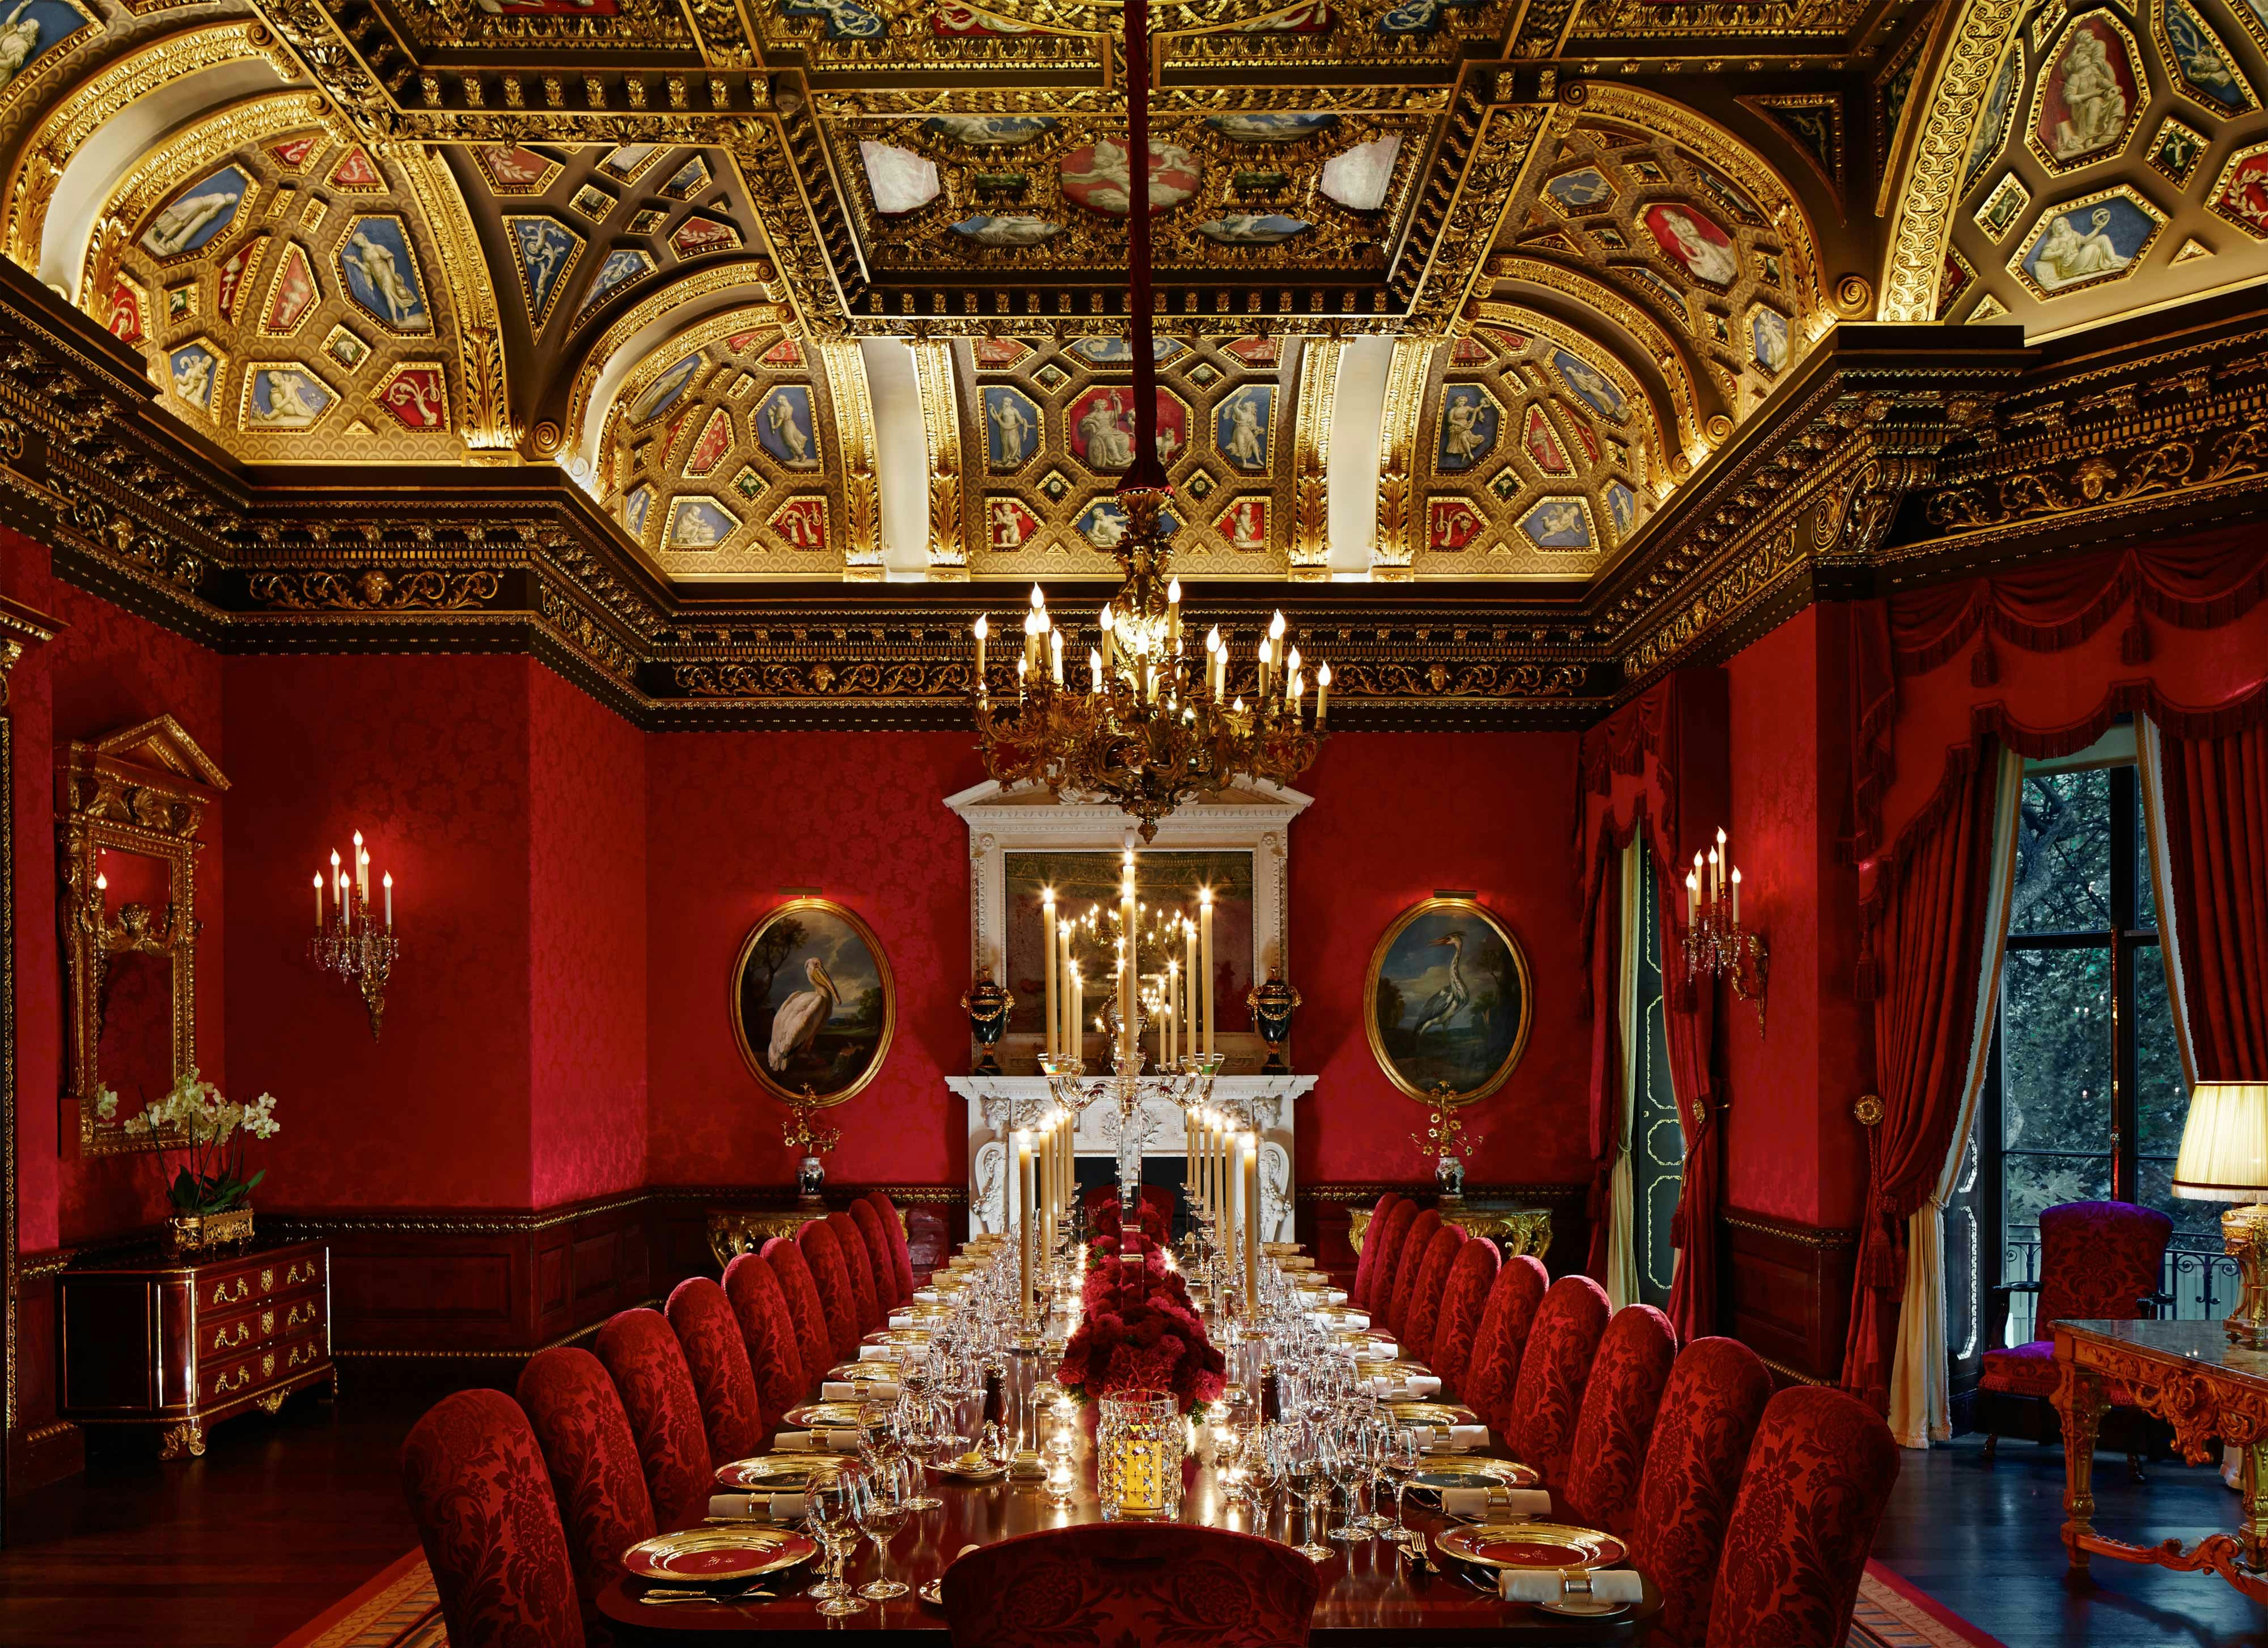 The Ritz London - The William Kent Room image 1